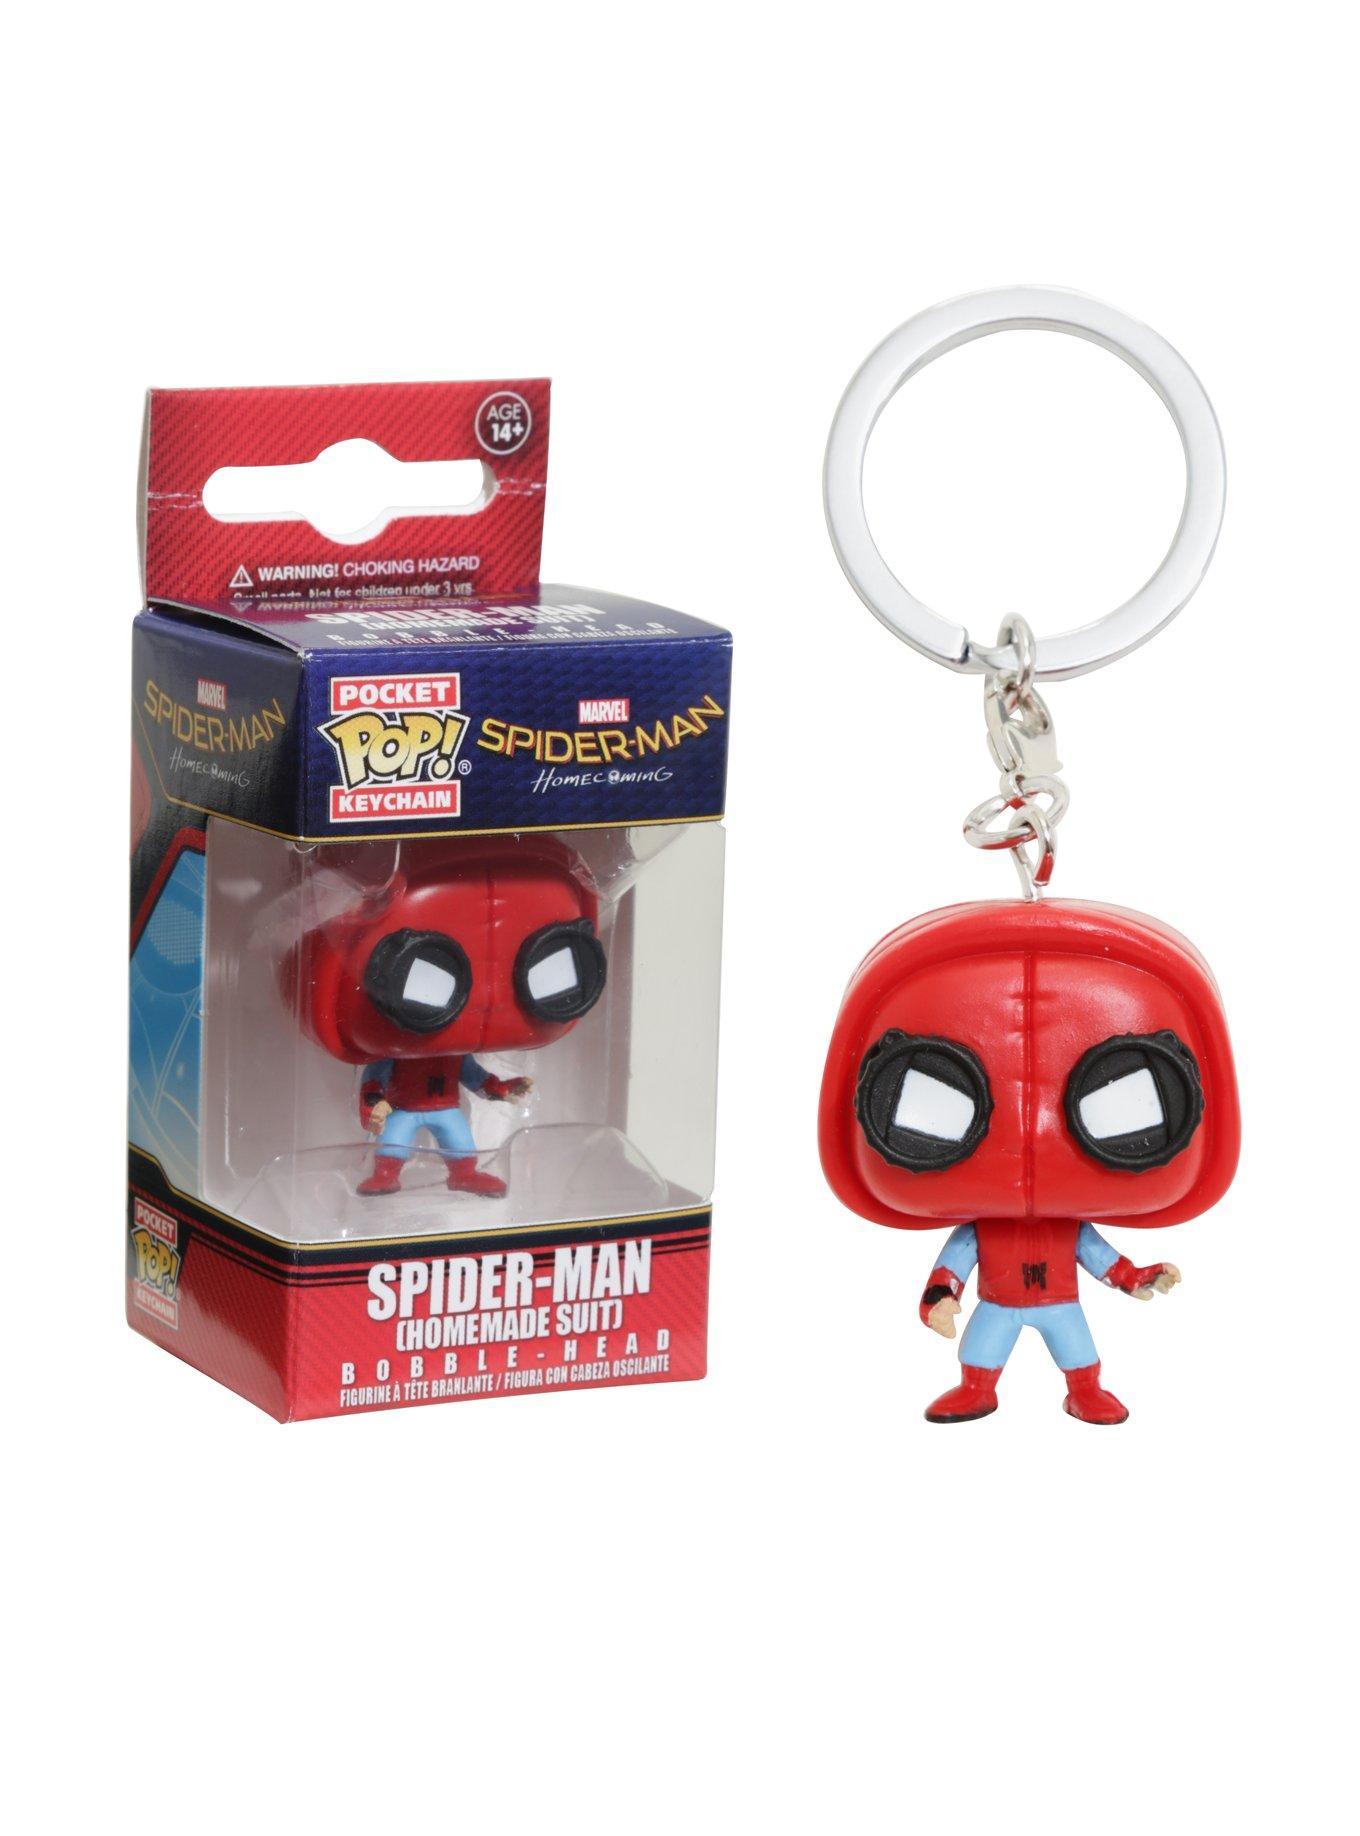 Funko Marvel Spider-Man: Homecoming Pocket Pop! Spider-Man (Homemade Suit)  Key Chain | Hot Topic